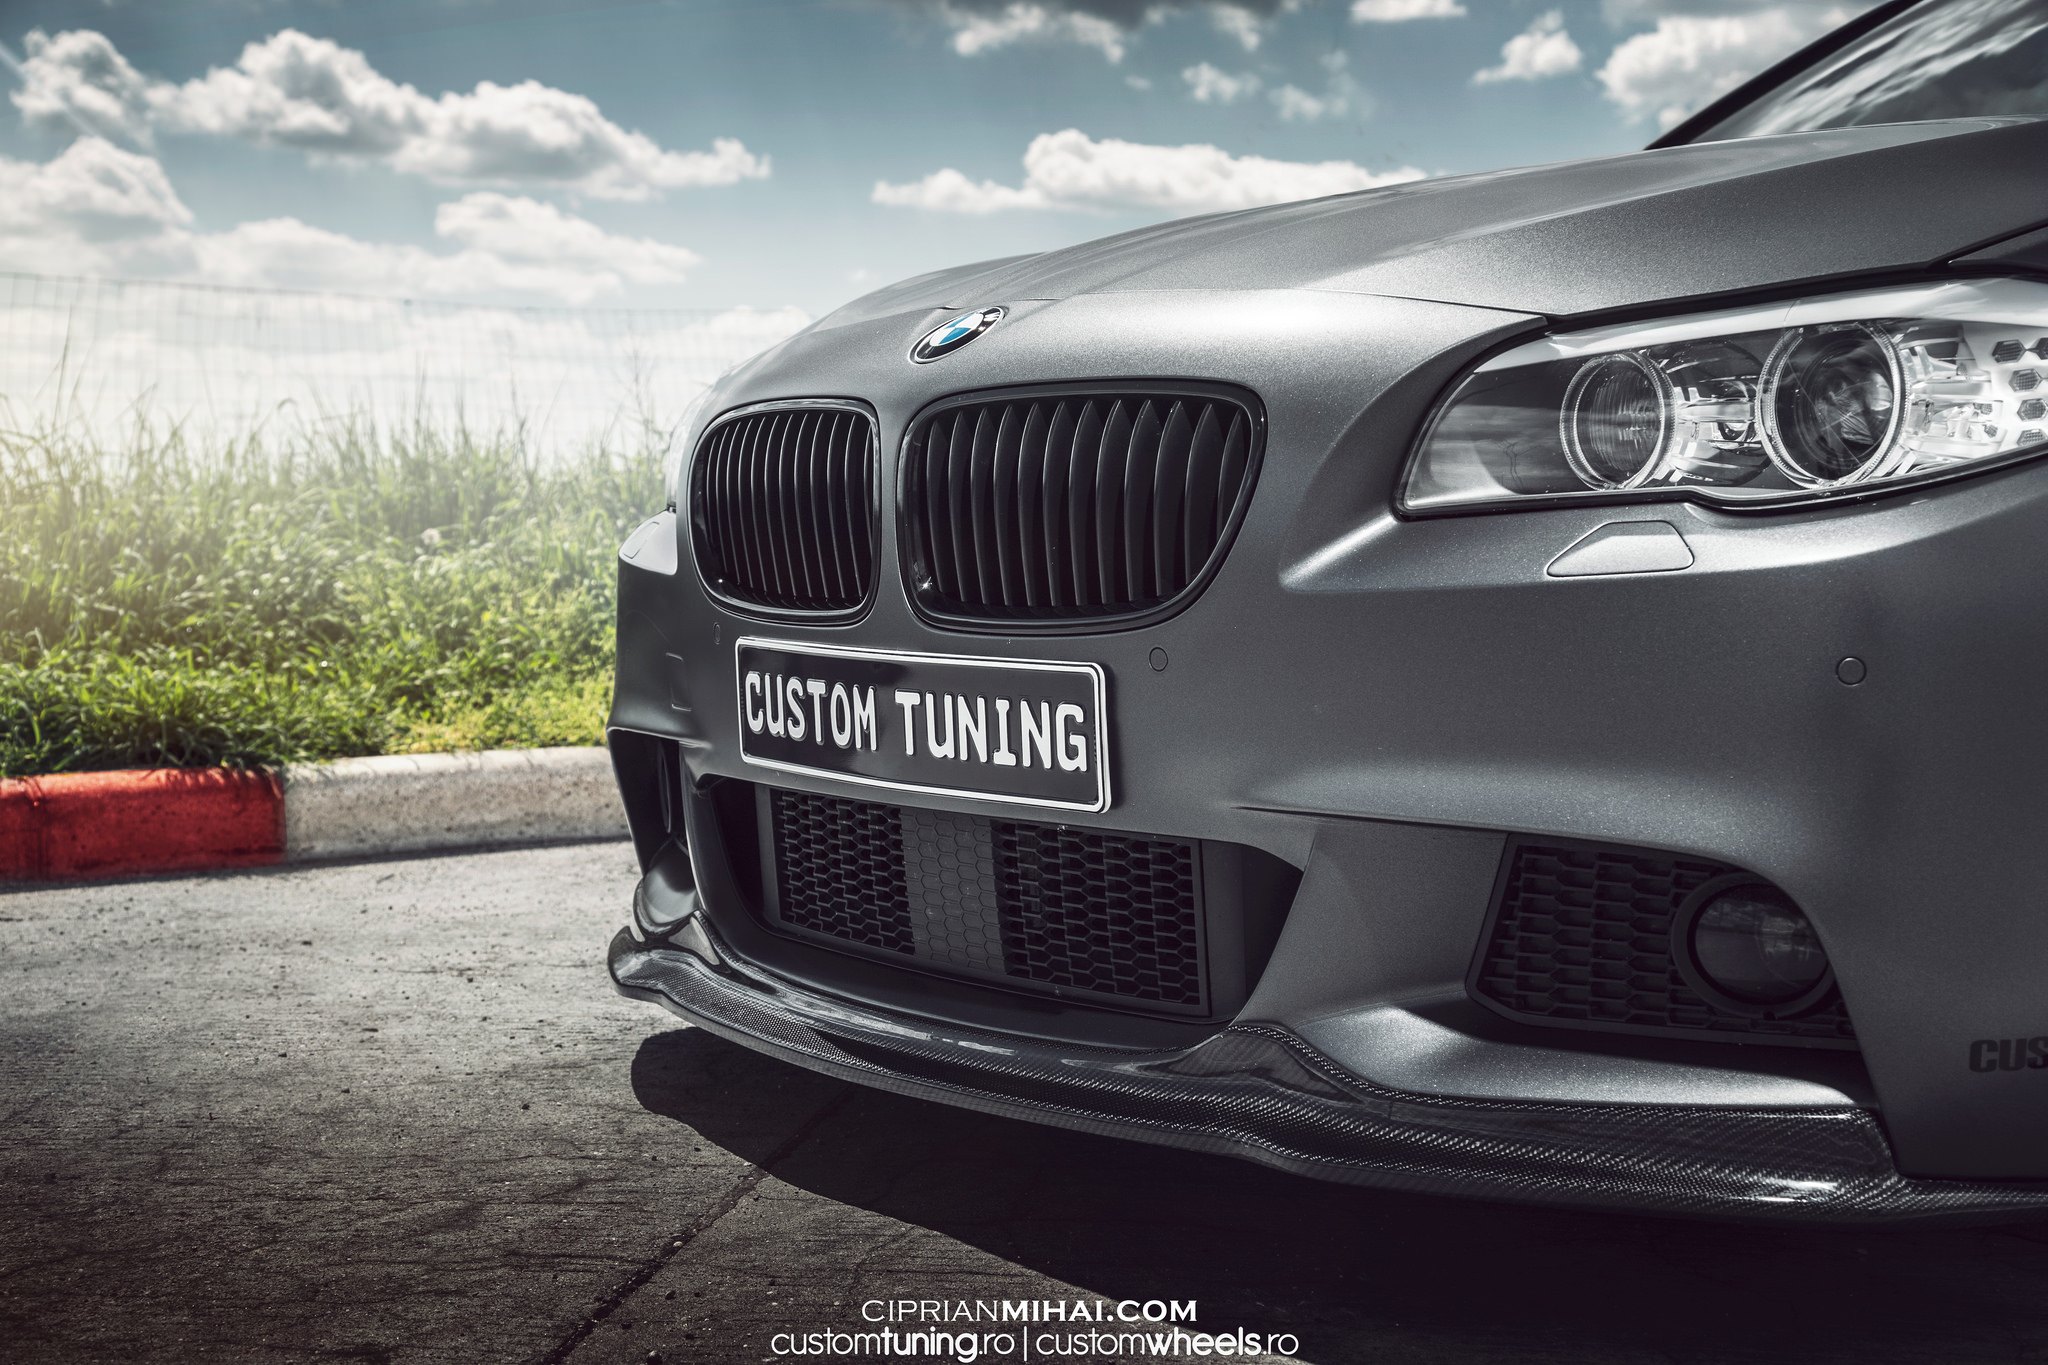 Blacked Out Grille on Gray BMW 5-Series - Photo by Ciprian Mihai